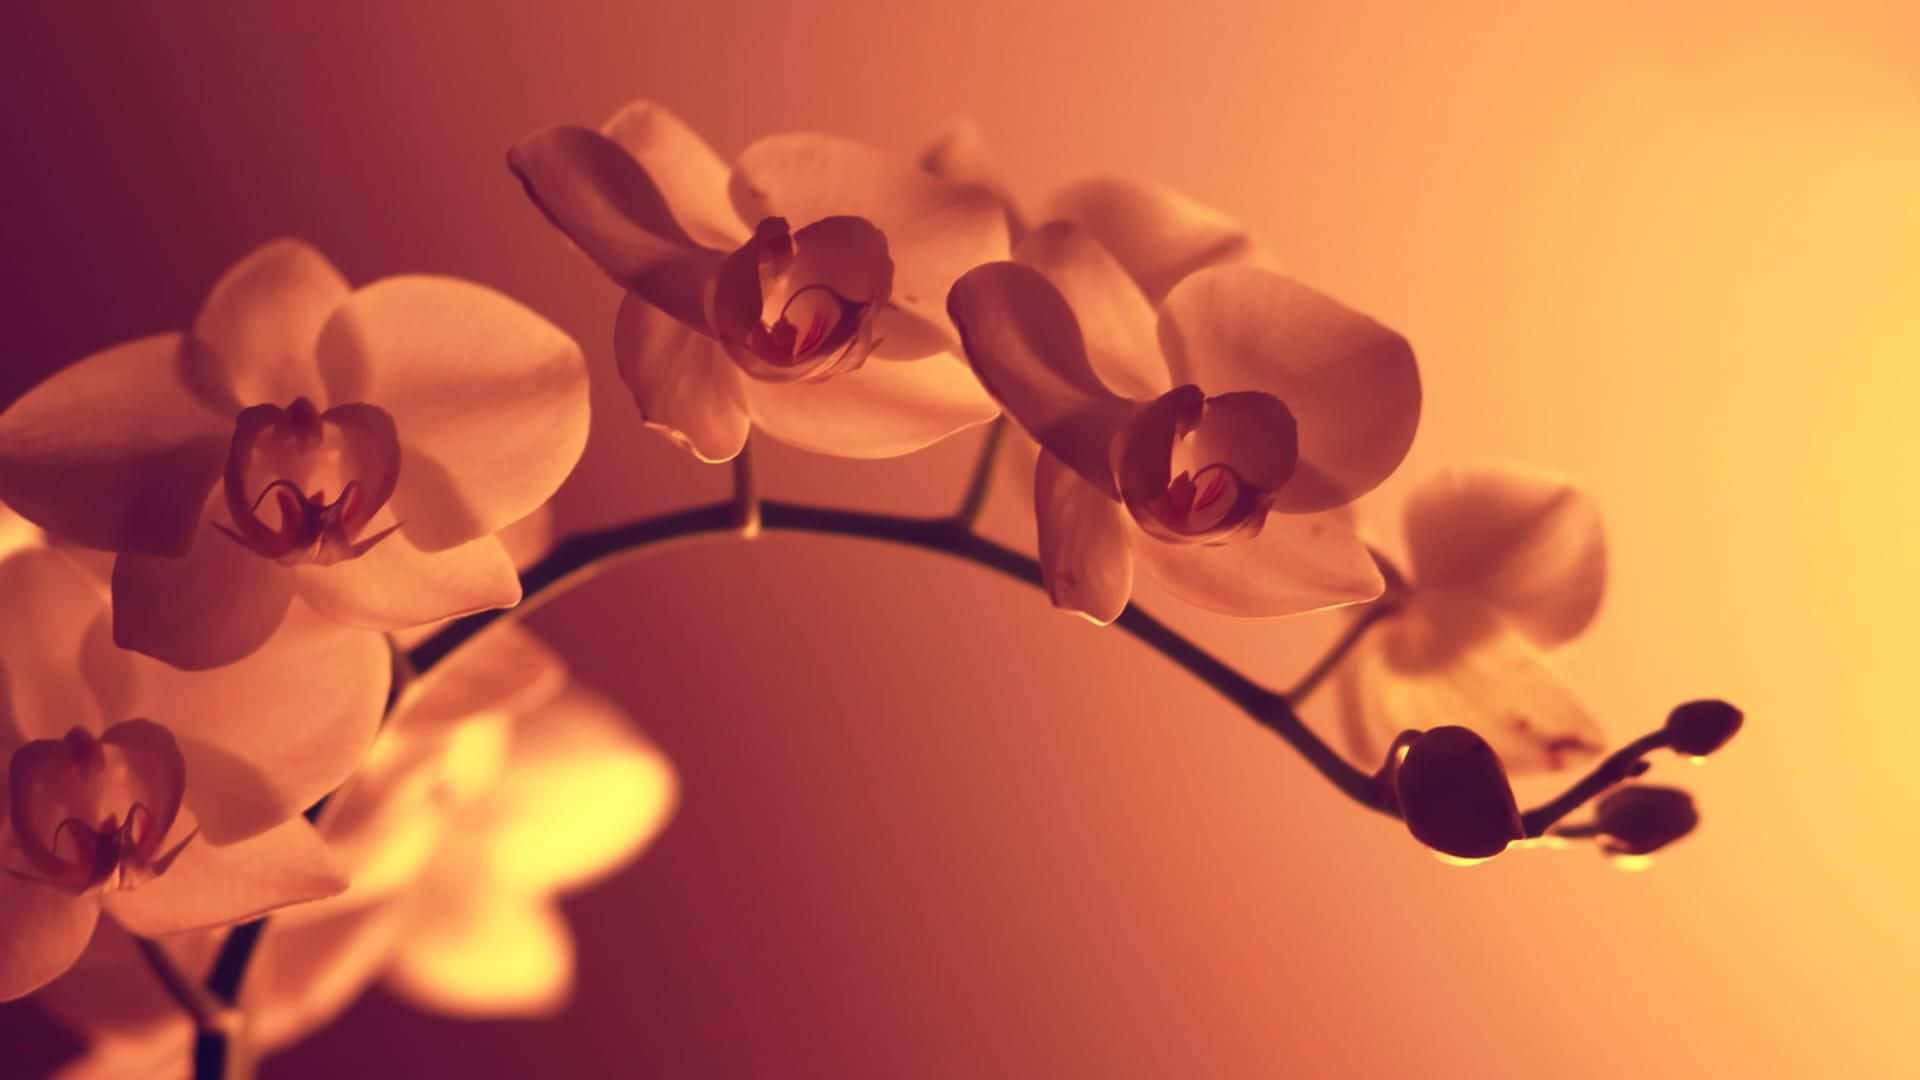 Orchids Wallpapers Hd - Wallpapers For Desktop Background